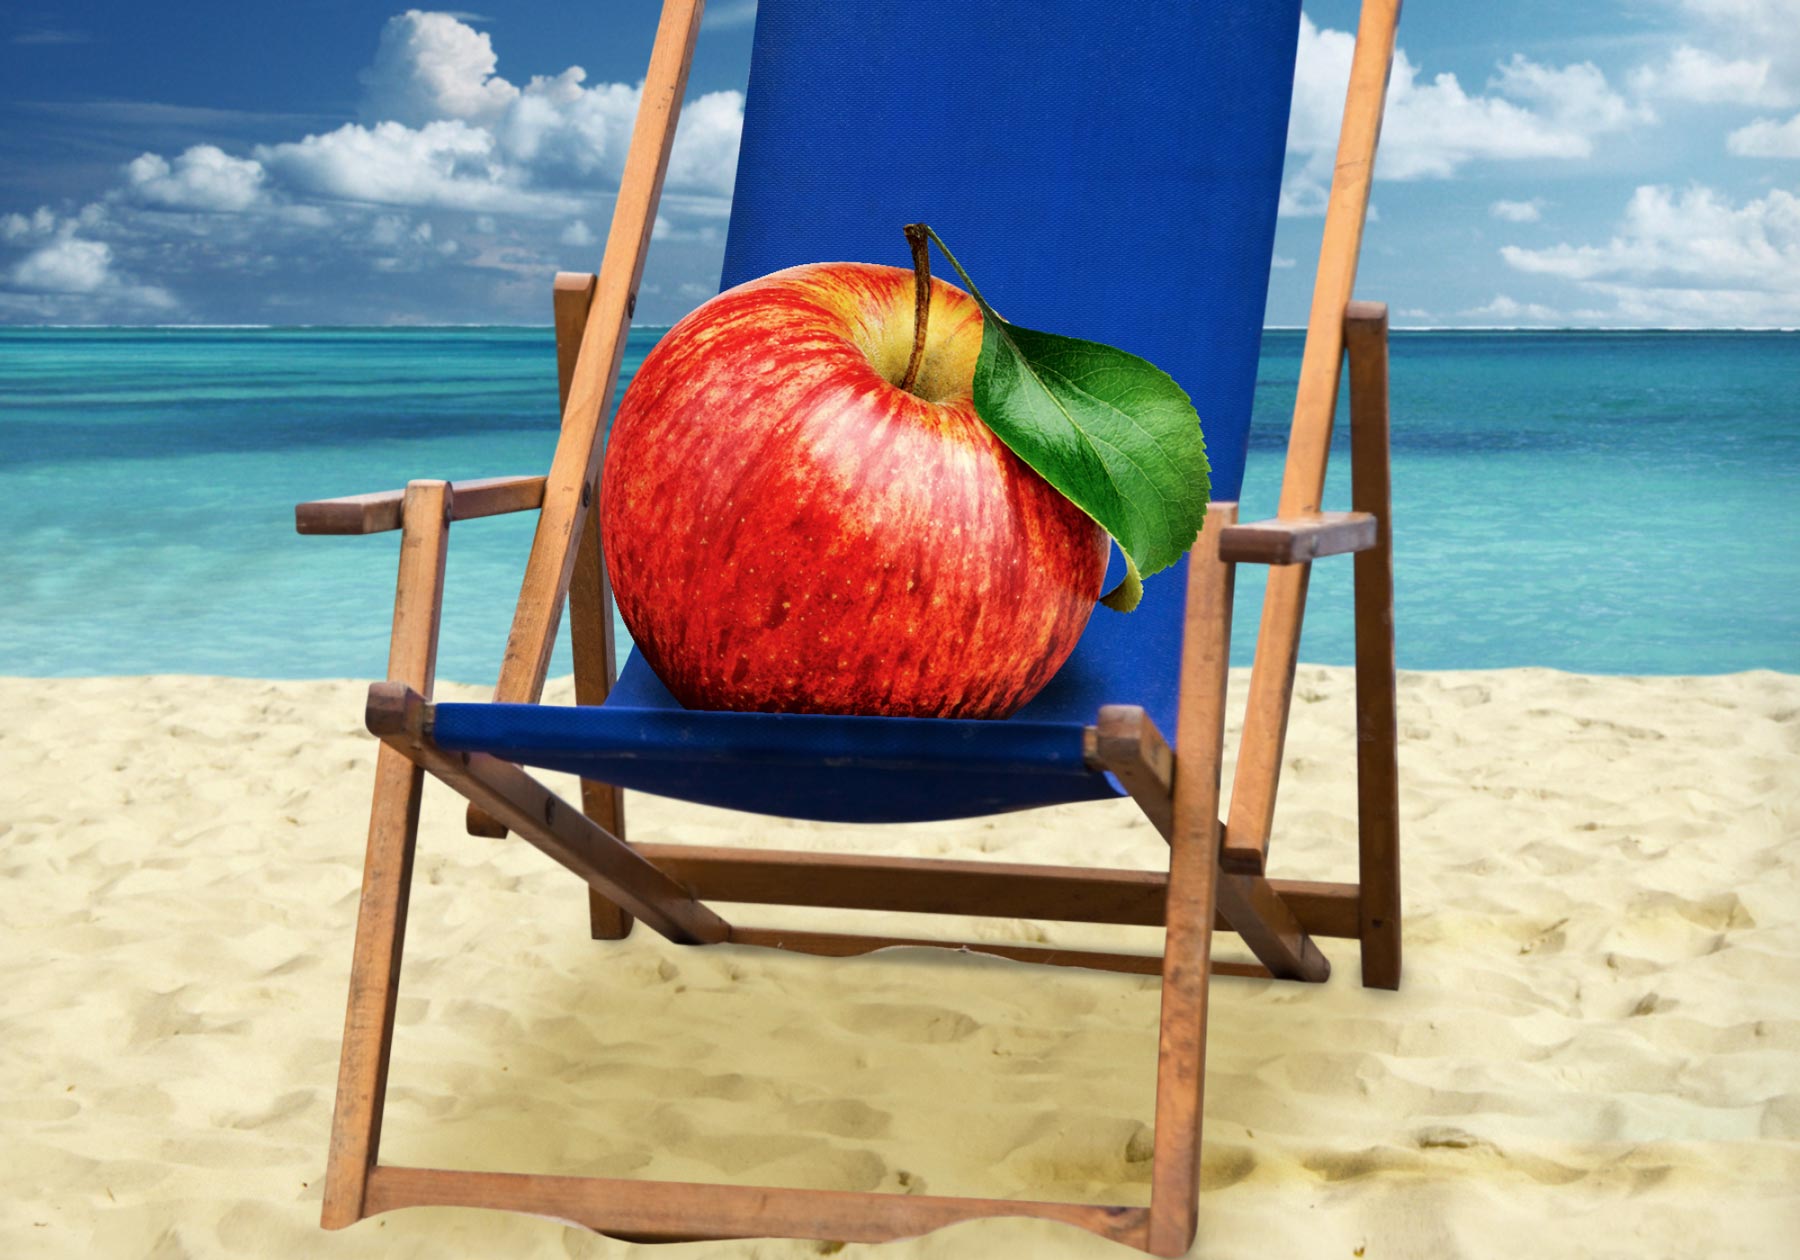 An apple relaxing in a chair on a sunny beach